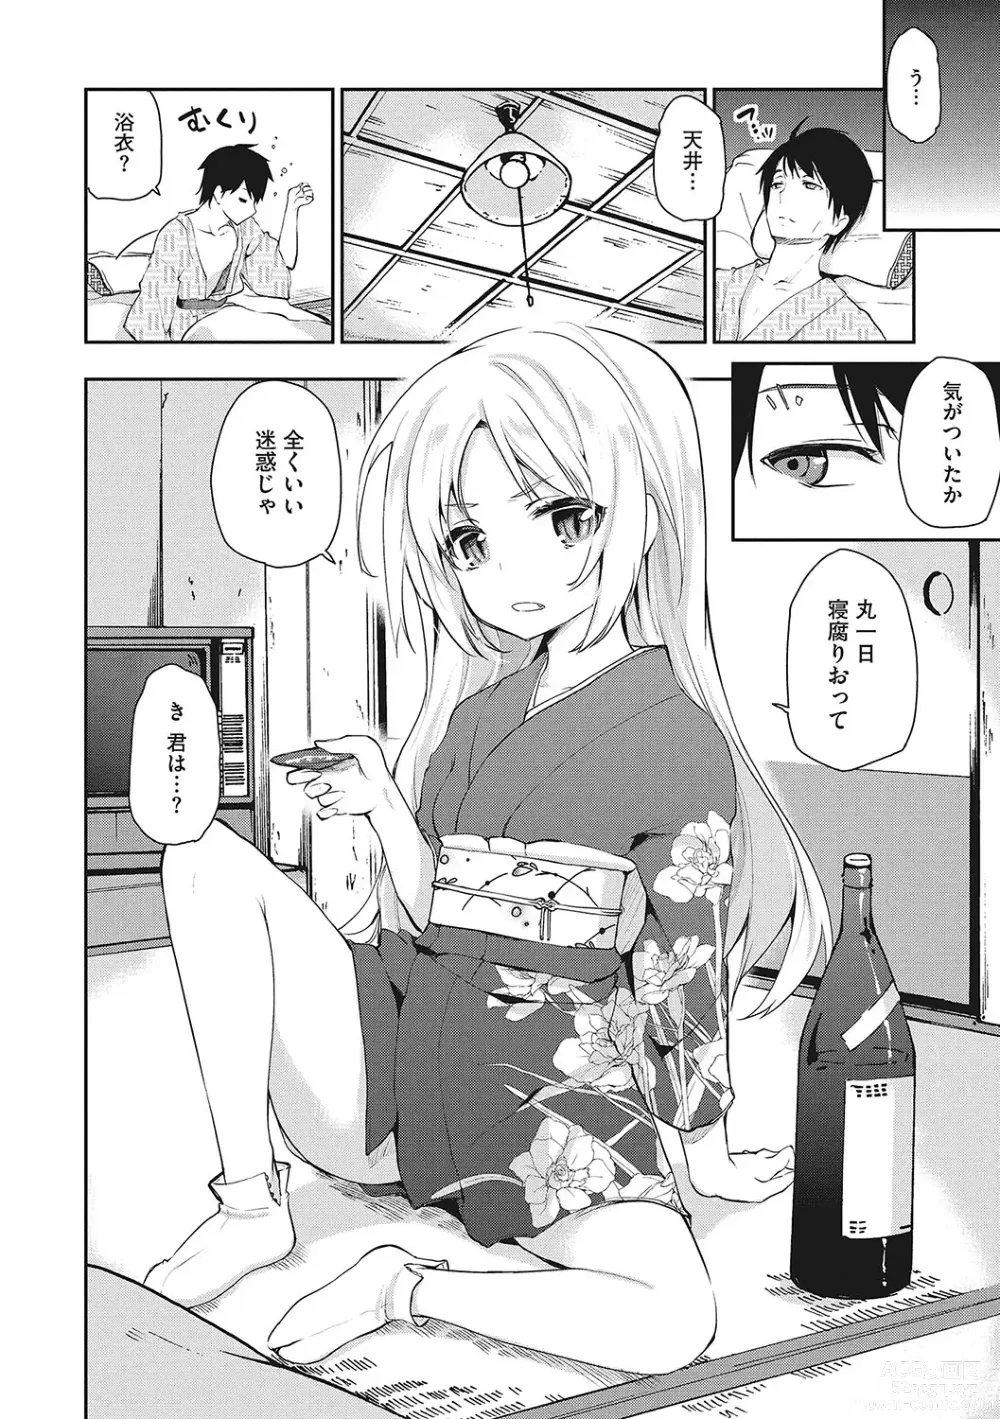 Page 11 of manga LQ -Little Queen- Vol. 54